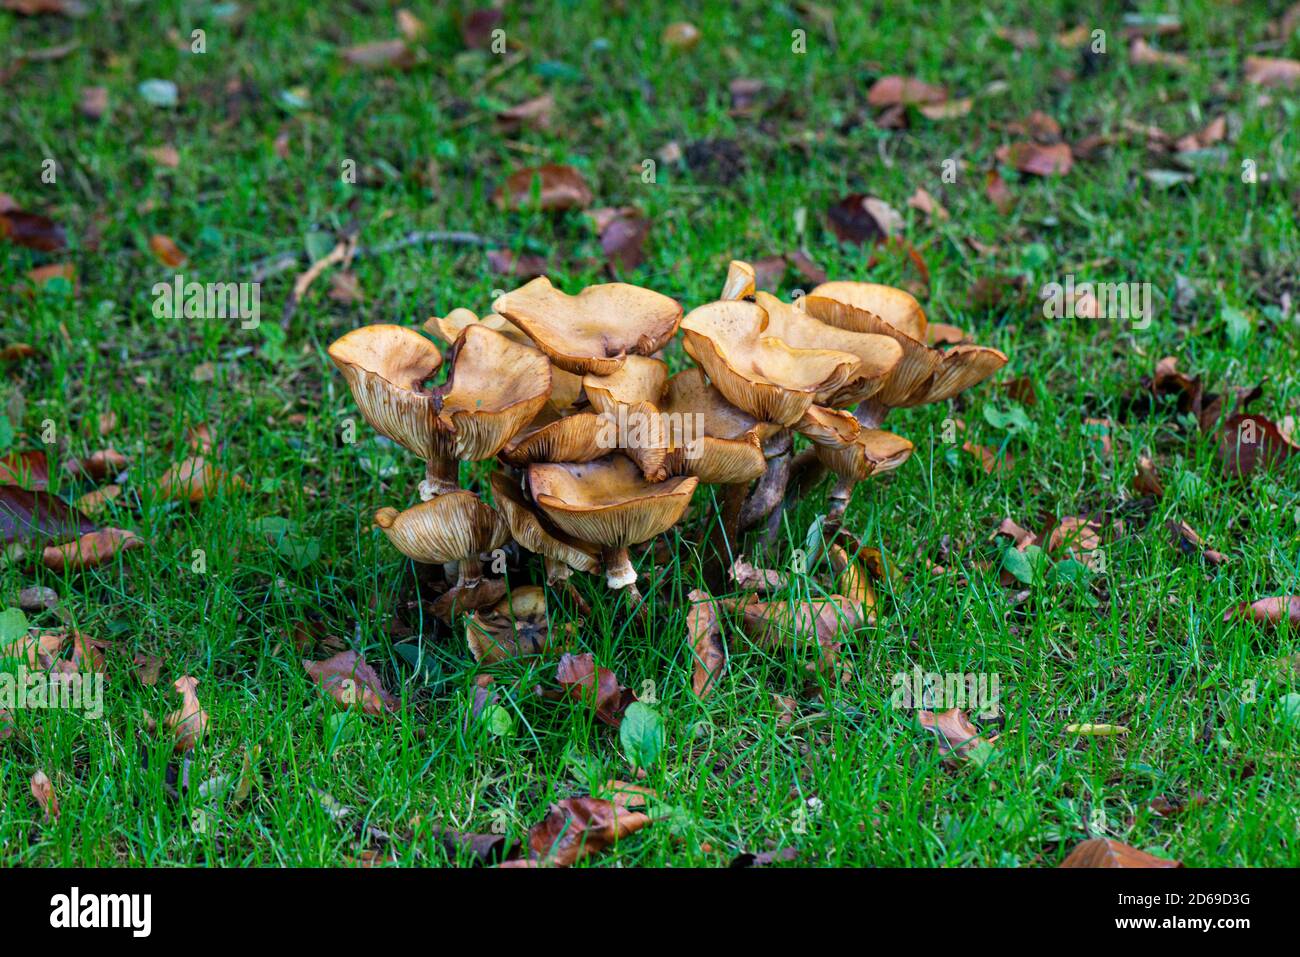 A group of fungi growing in grass Stock Photo